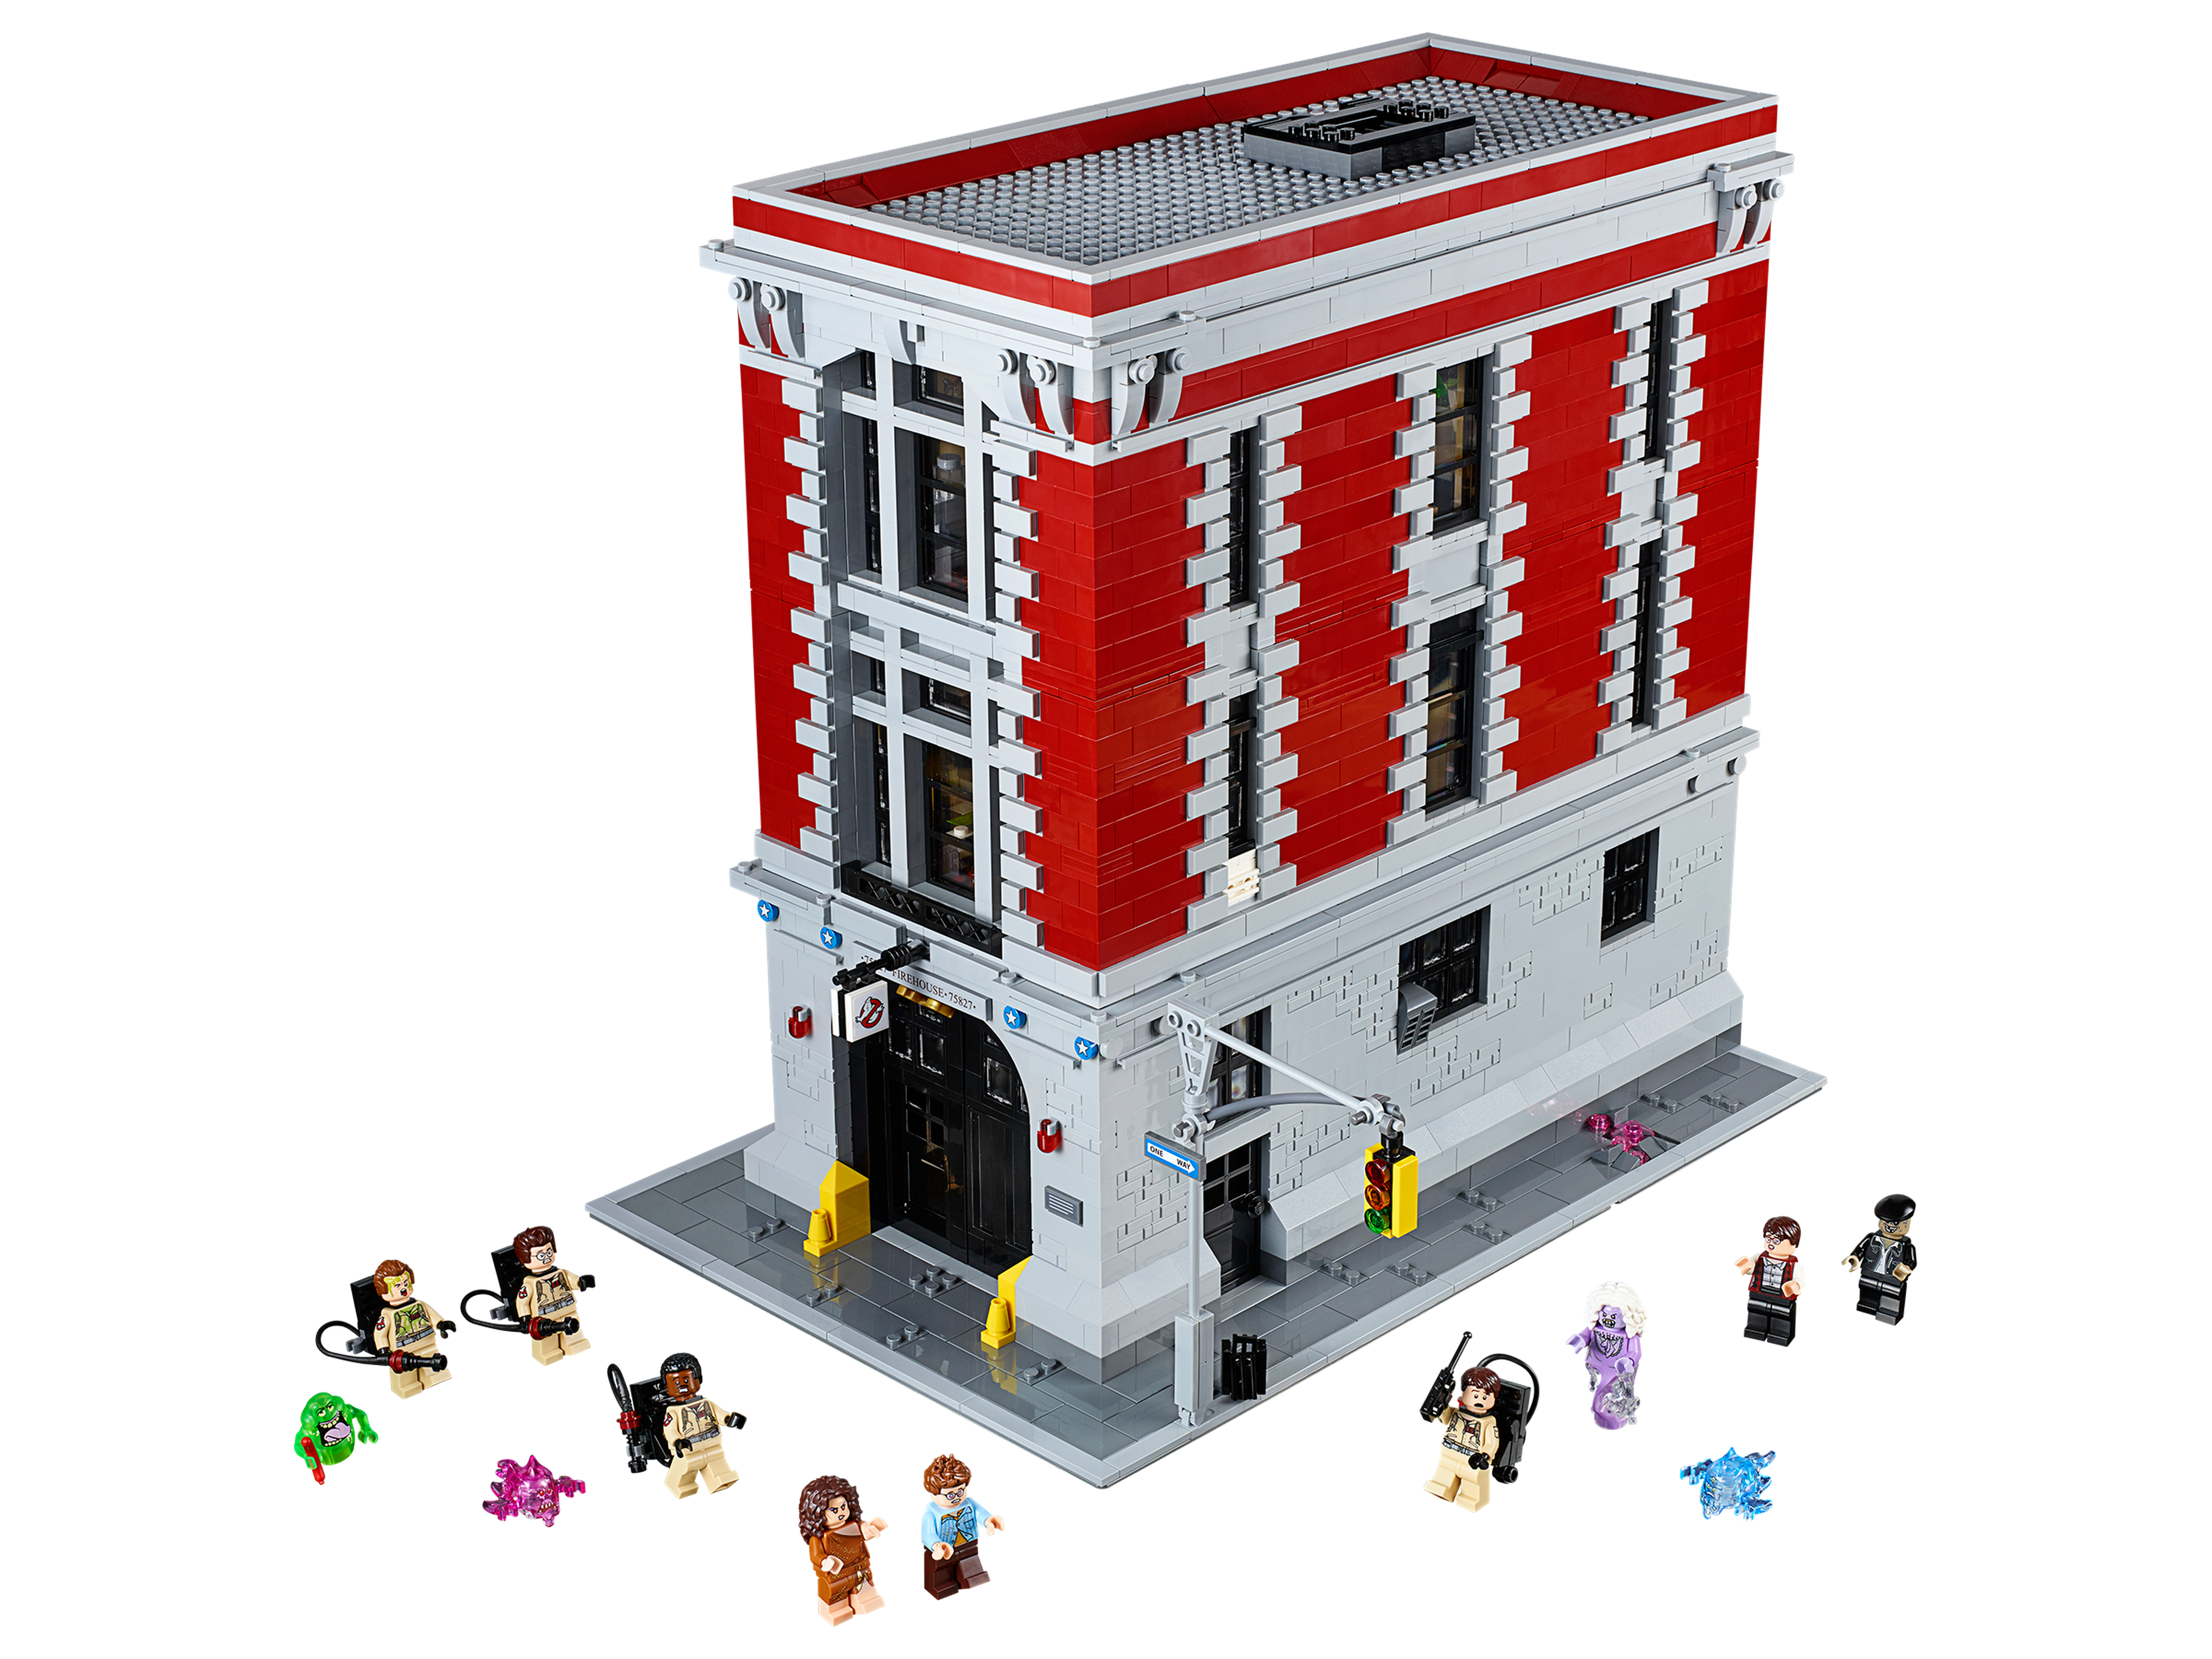 Lego 75827 Officially Revealed Today by Lego - LEGO Ghostbusters Firehouse Headquarters 